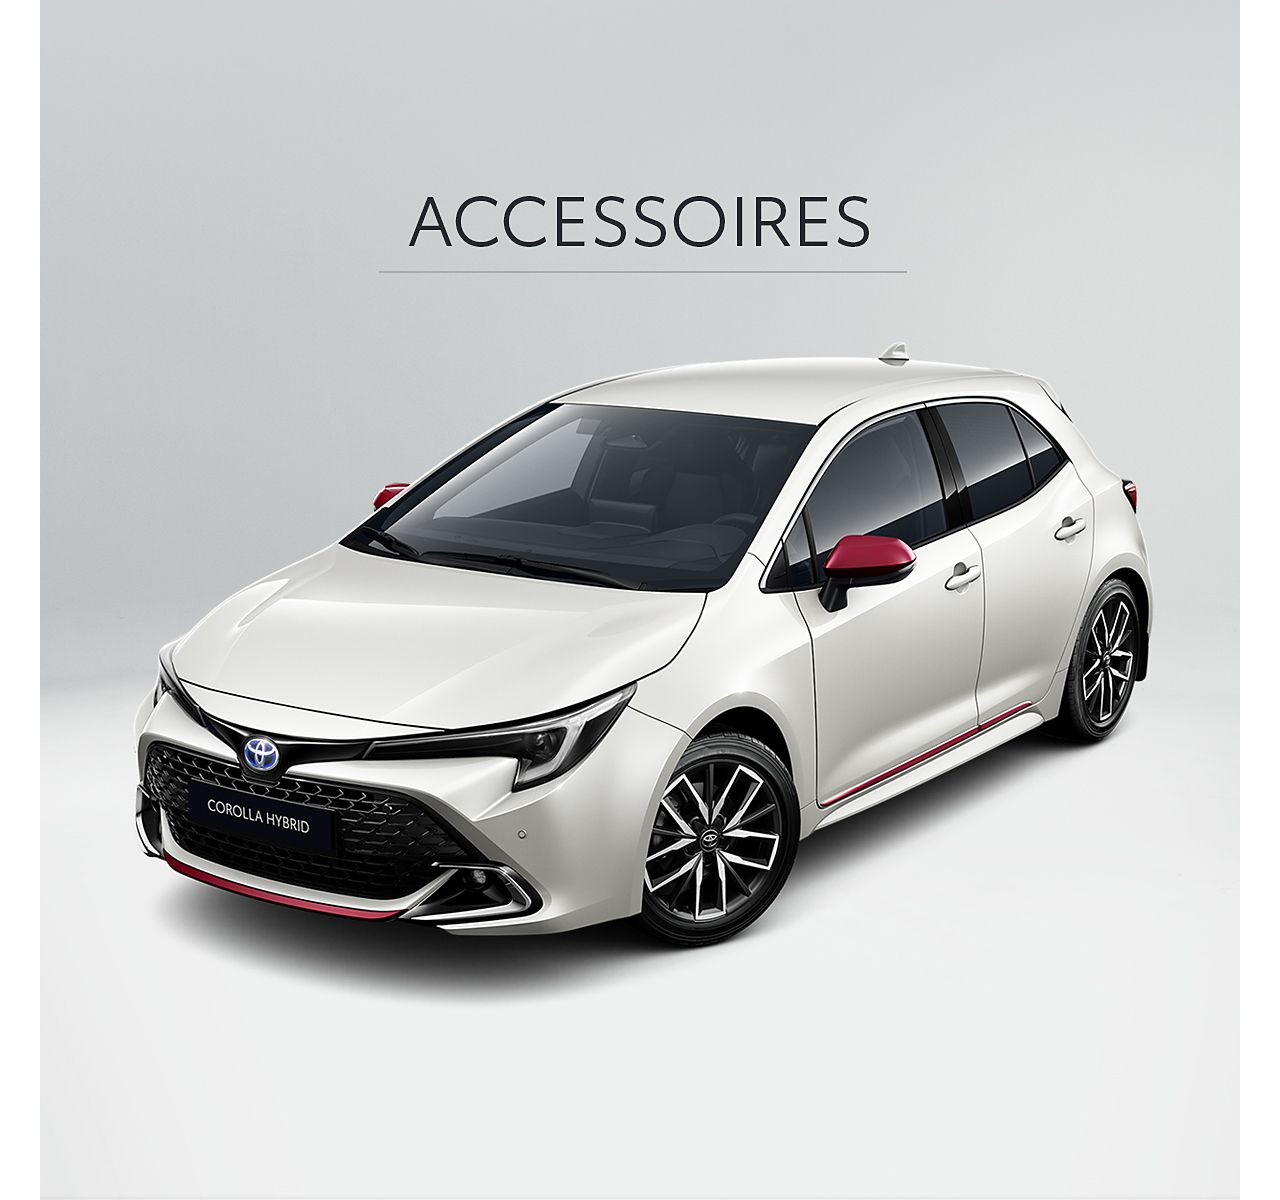 https://scene7.toyota.eu/is/image/toyotaeurope/encart-card-car-chapters-corolla?wid=1280&fit=fit,1&ts=1695903490147&resMode=sharp2&op_usm=1.75,0.3,2,0